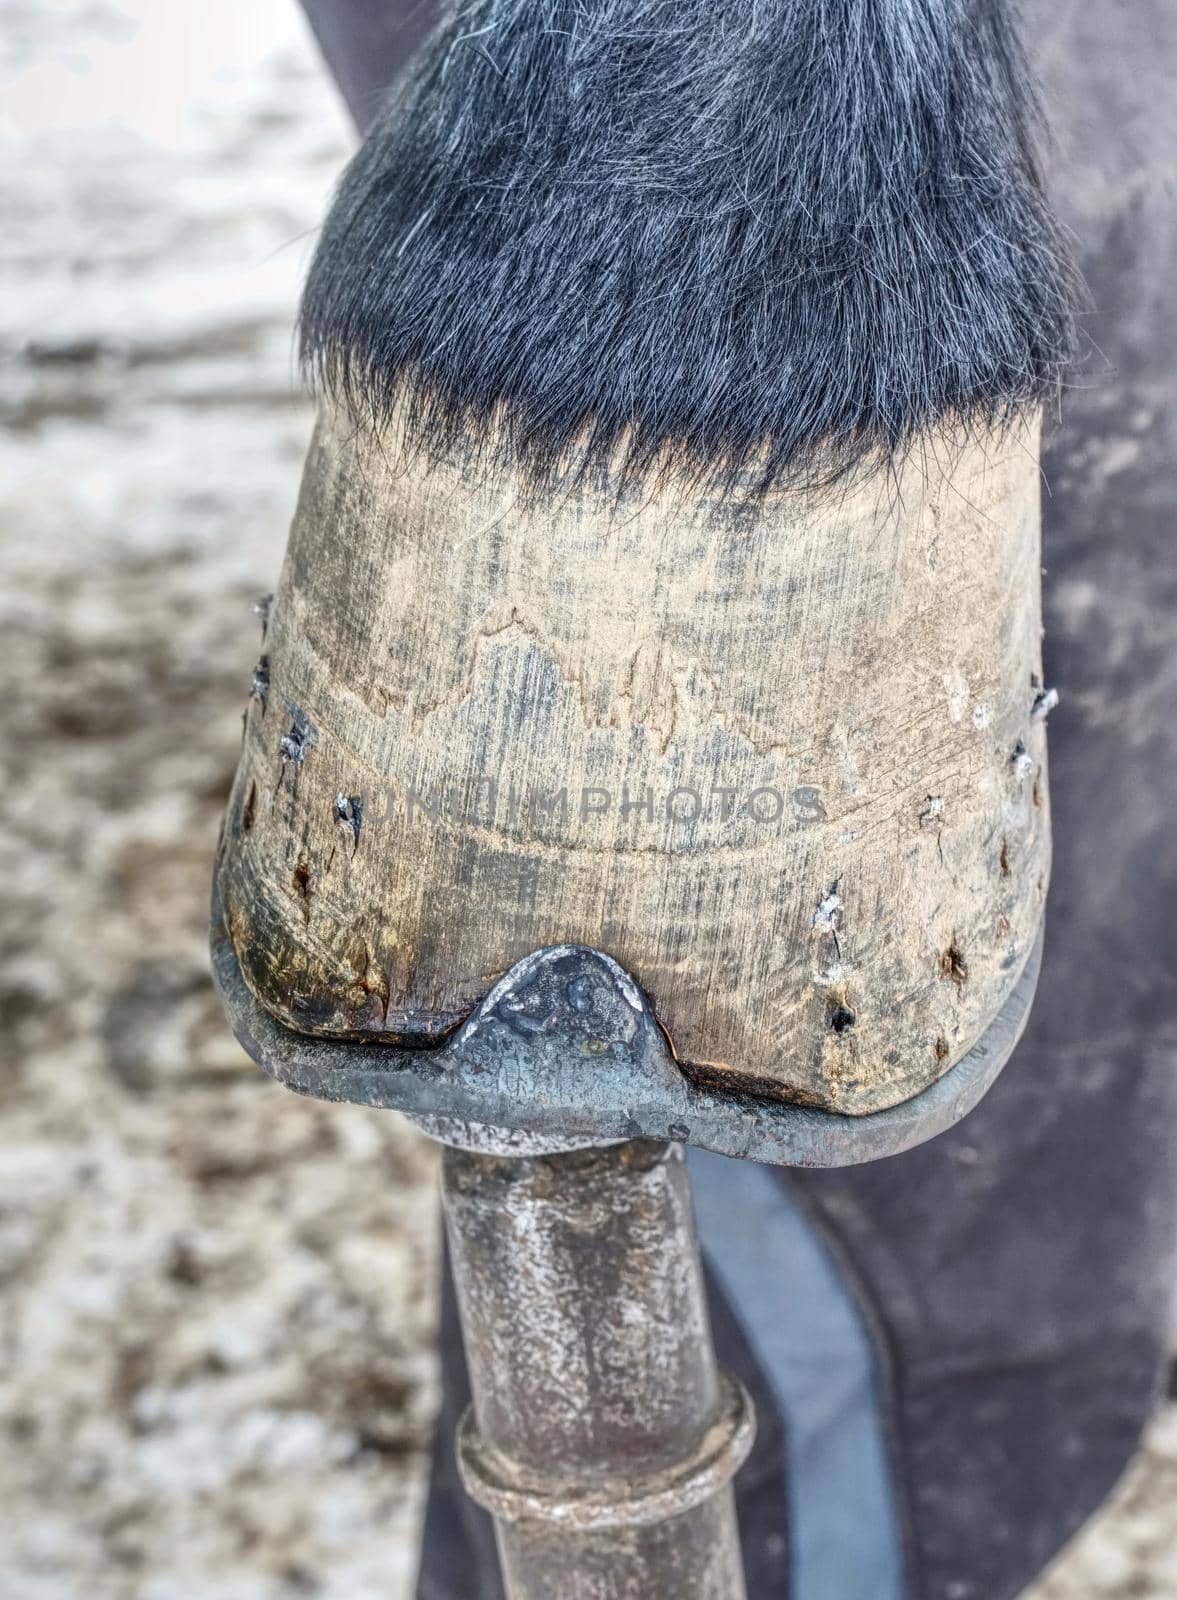 Blacksmith cut of long spiky ends of steel nail in horse hoof after setting new horseshoes.